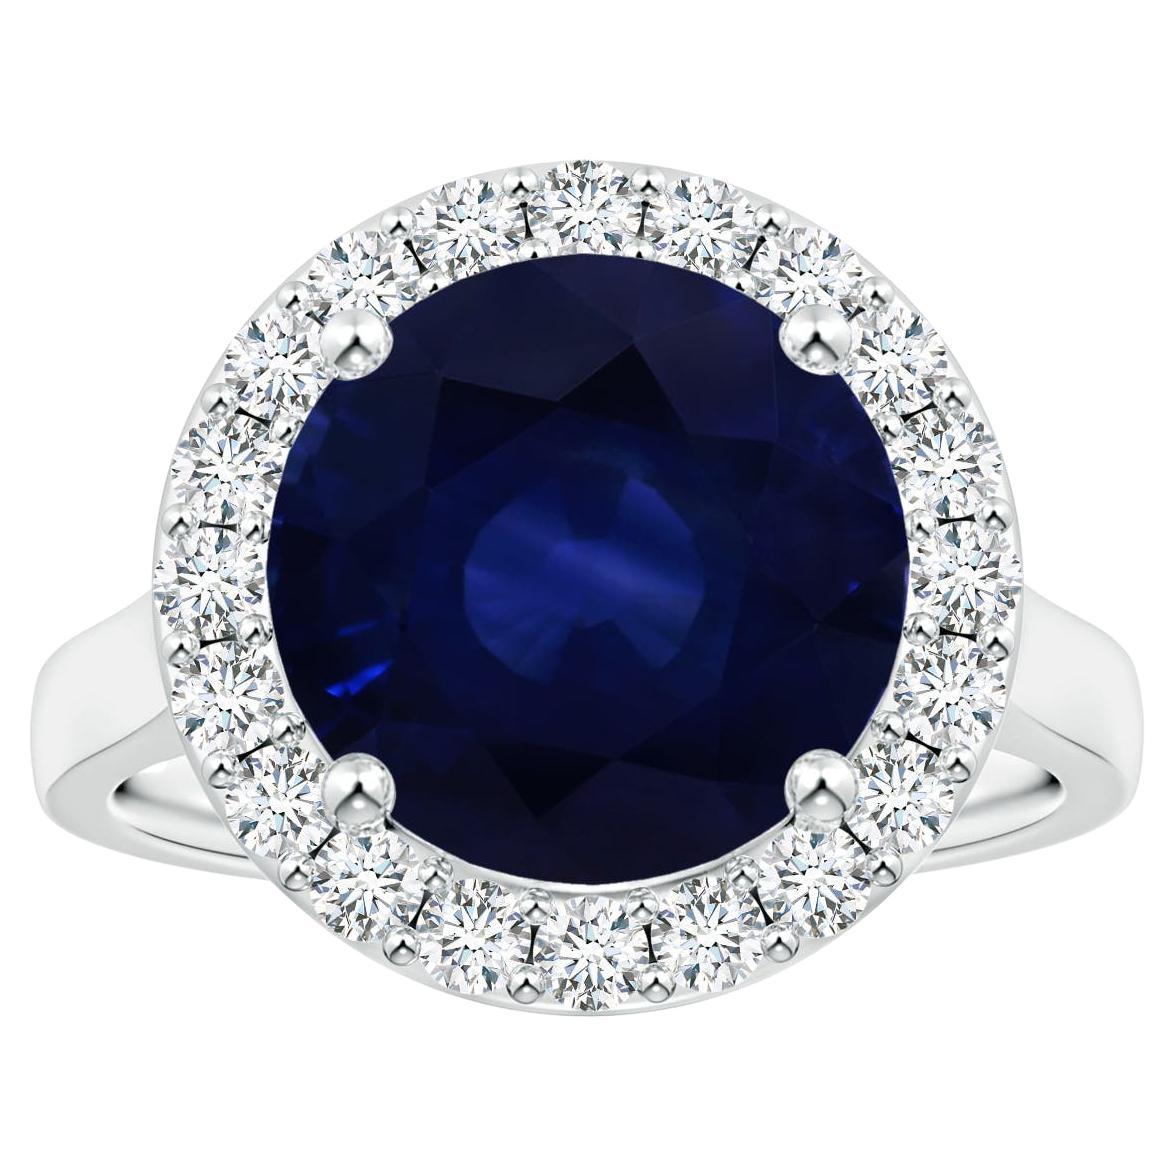 ANGARA GIA Certified Natural 6.63ct Blue Sapphire Ring with Diamond in Platinum